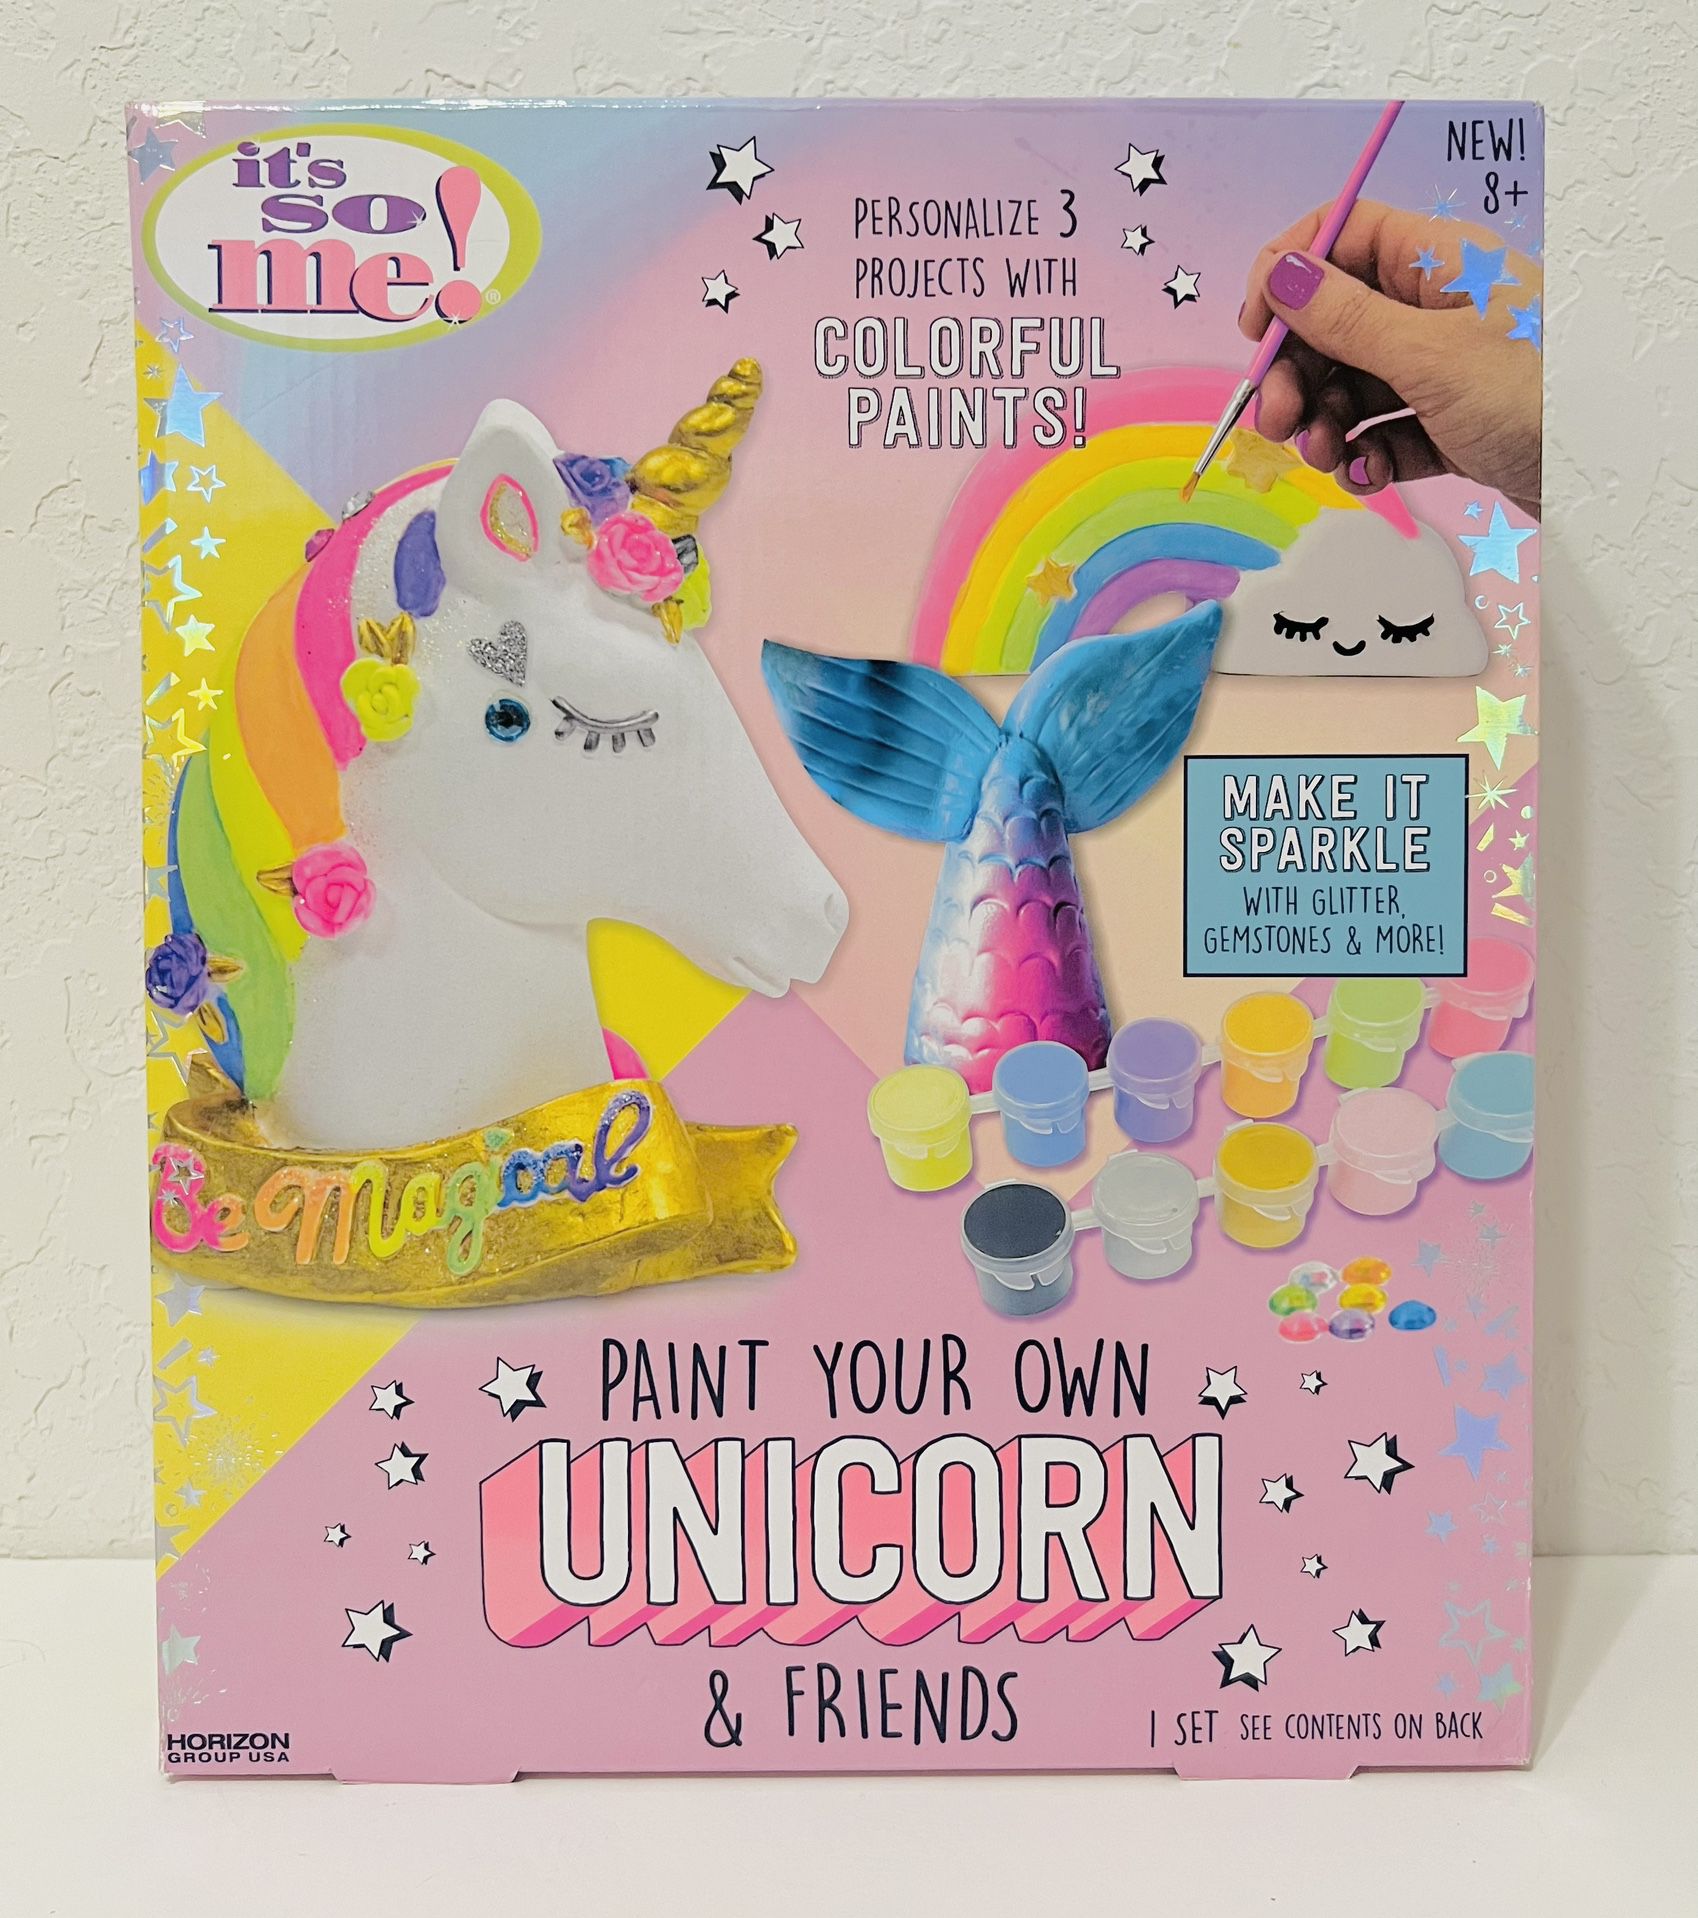 Paint Your Own Unicorn and Friends - It's So Me